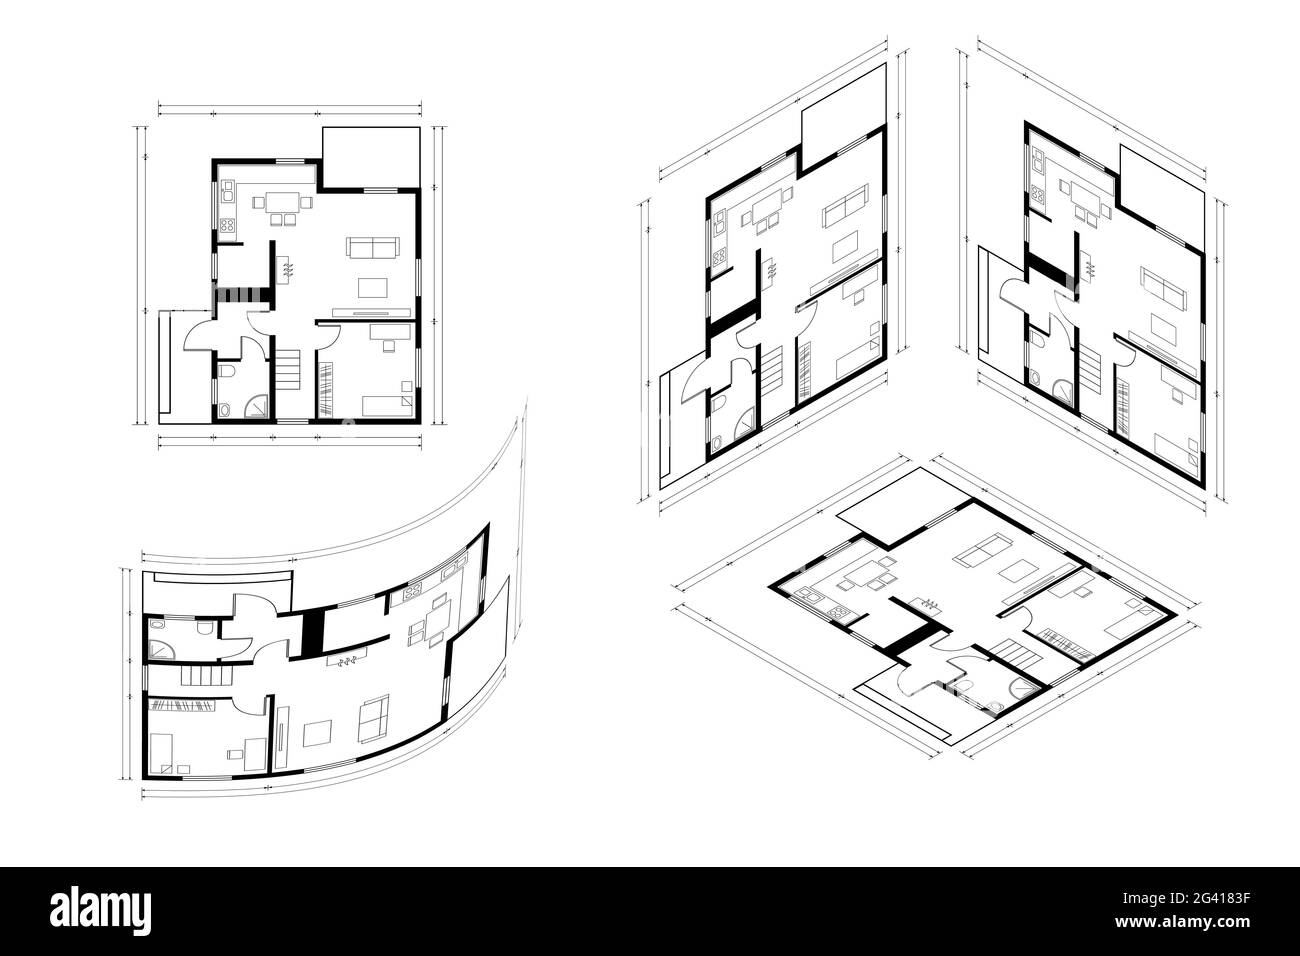 Isometric Architect Blueprint Vector Plan of Home. Blueprint House Plan Drawing. Professional Architectural Illustration Sketch Home. Stock Vector